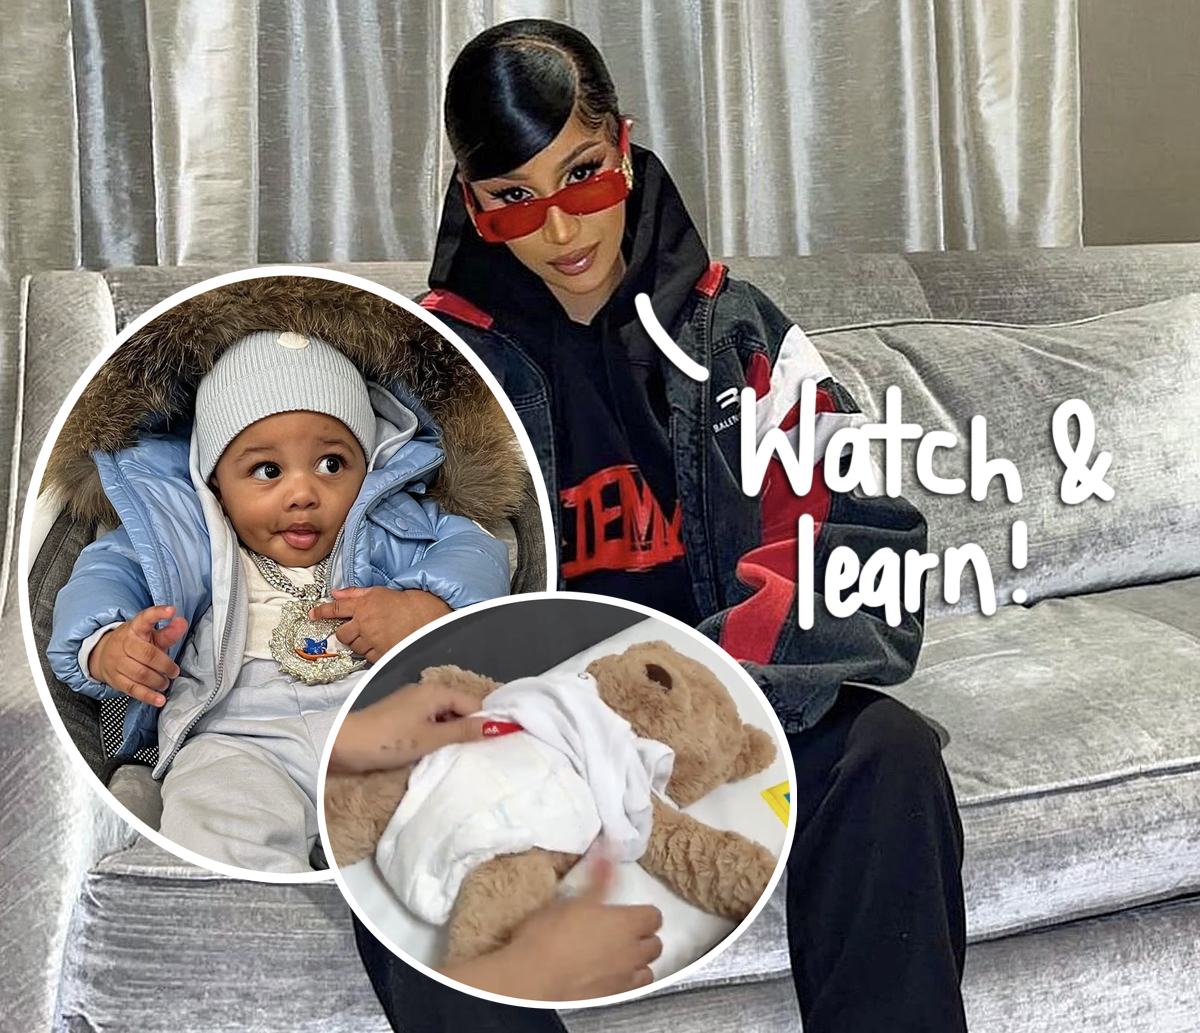 #Cardi B’s Got Talent — Shows How She Changes Diapers With Her Wildly Long Nails!